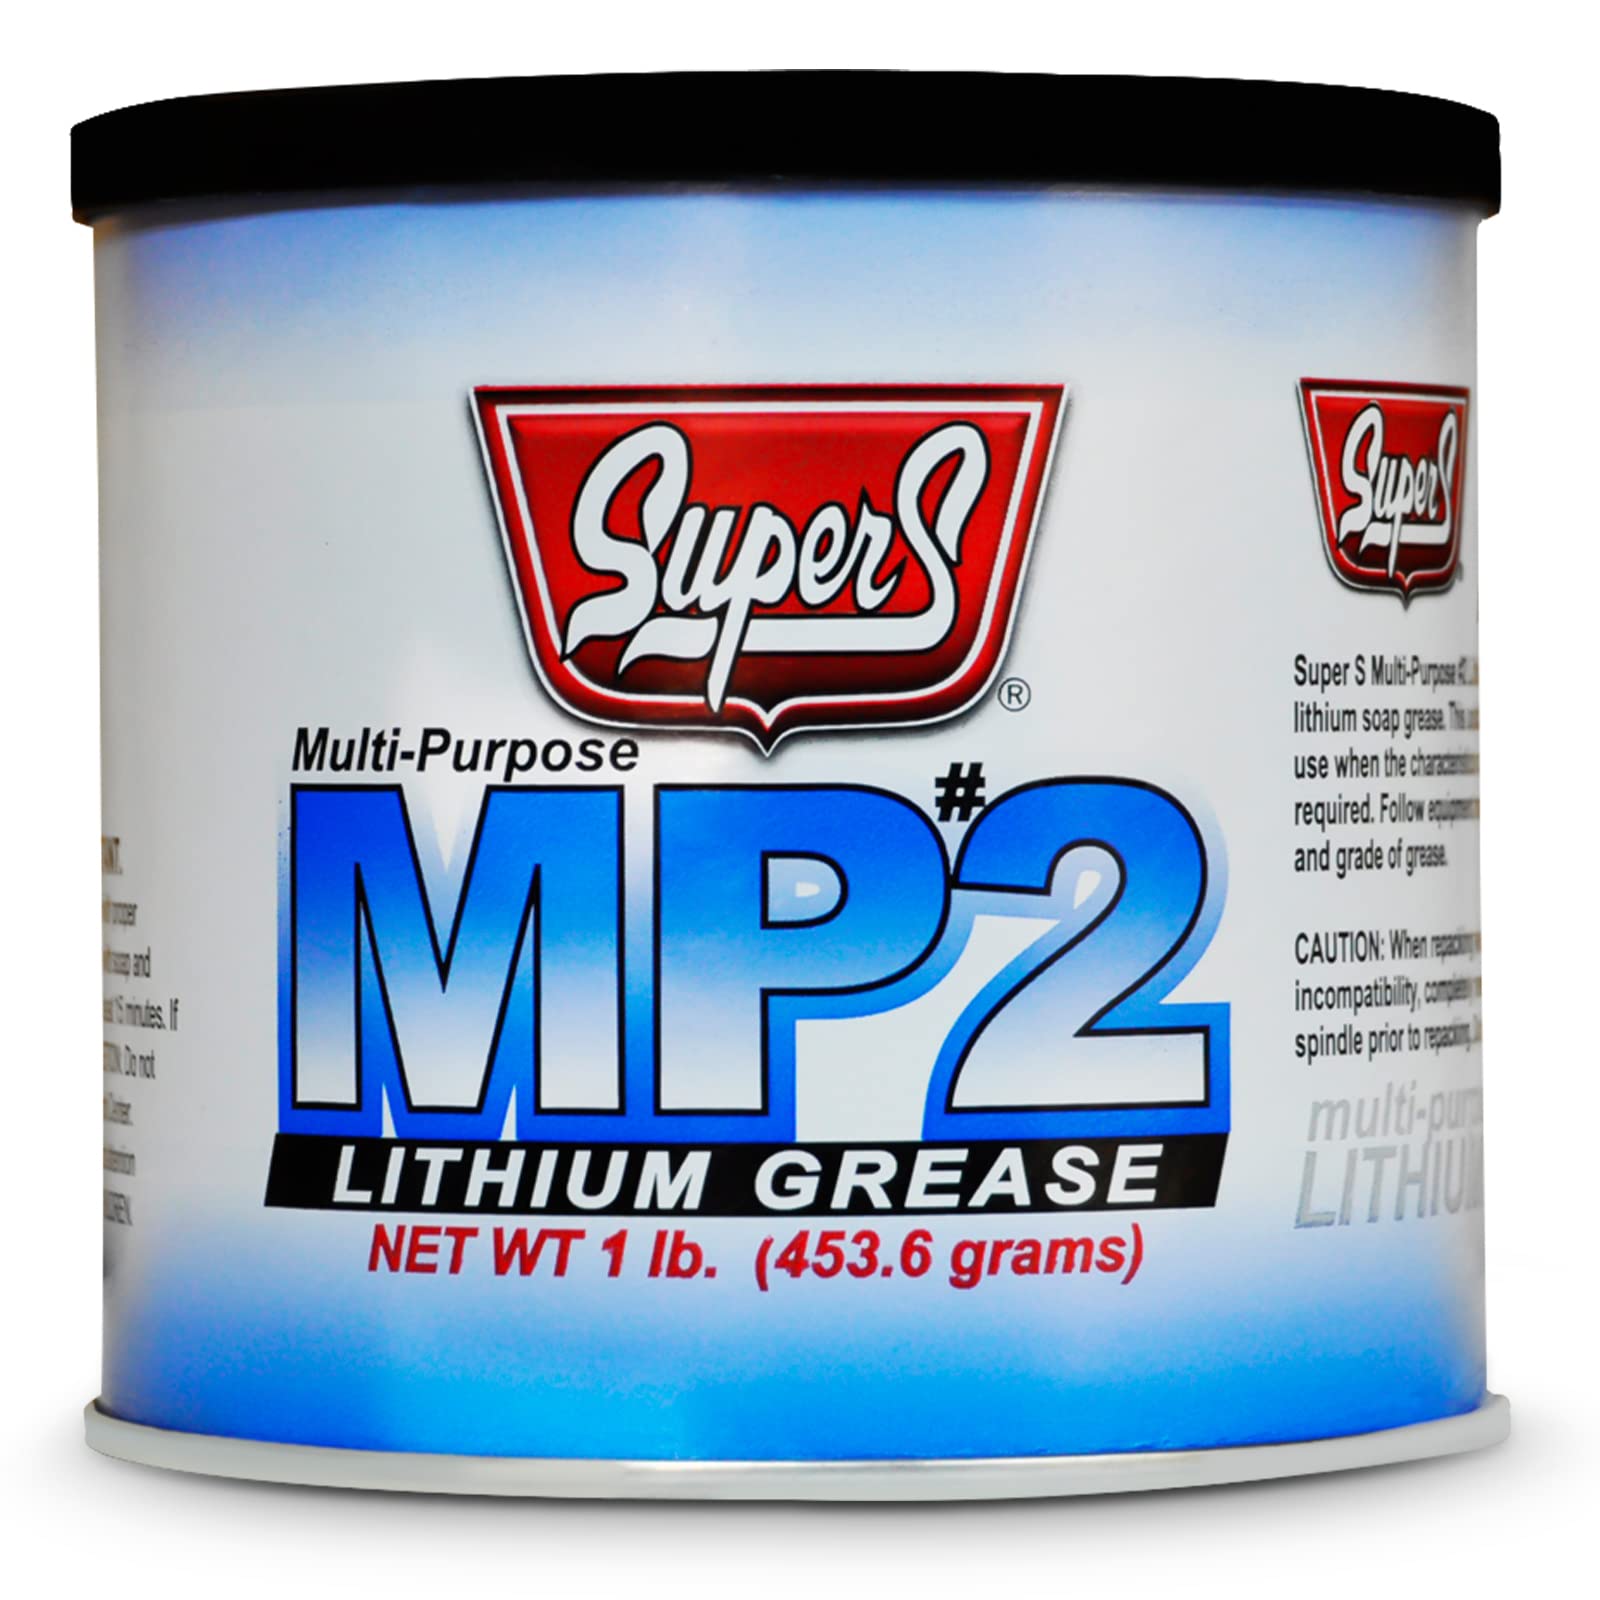 Super S Multi-Purpose Lithium Grease-High Performance Lithium Multipurpose Grease-Effective Automotive Grease-Perfect Lubricant Grease for Applications-Available with Premium Quality Gloves-1lb